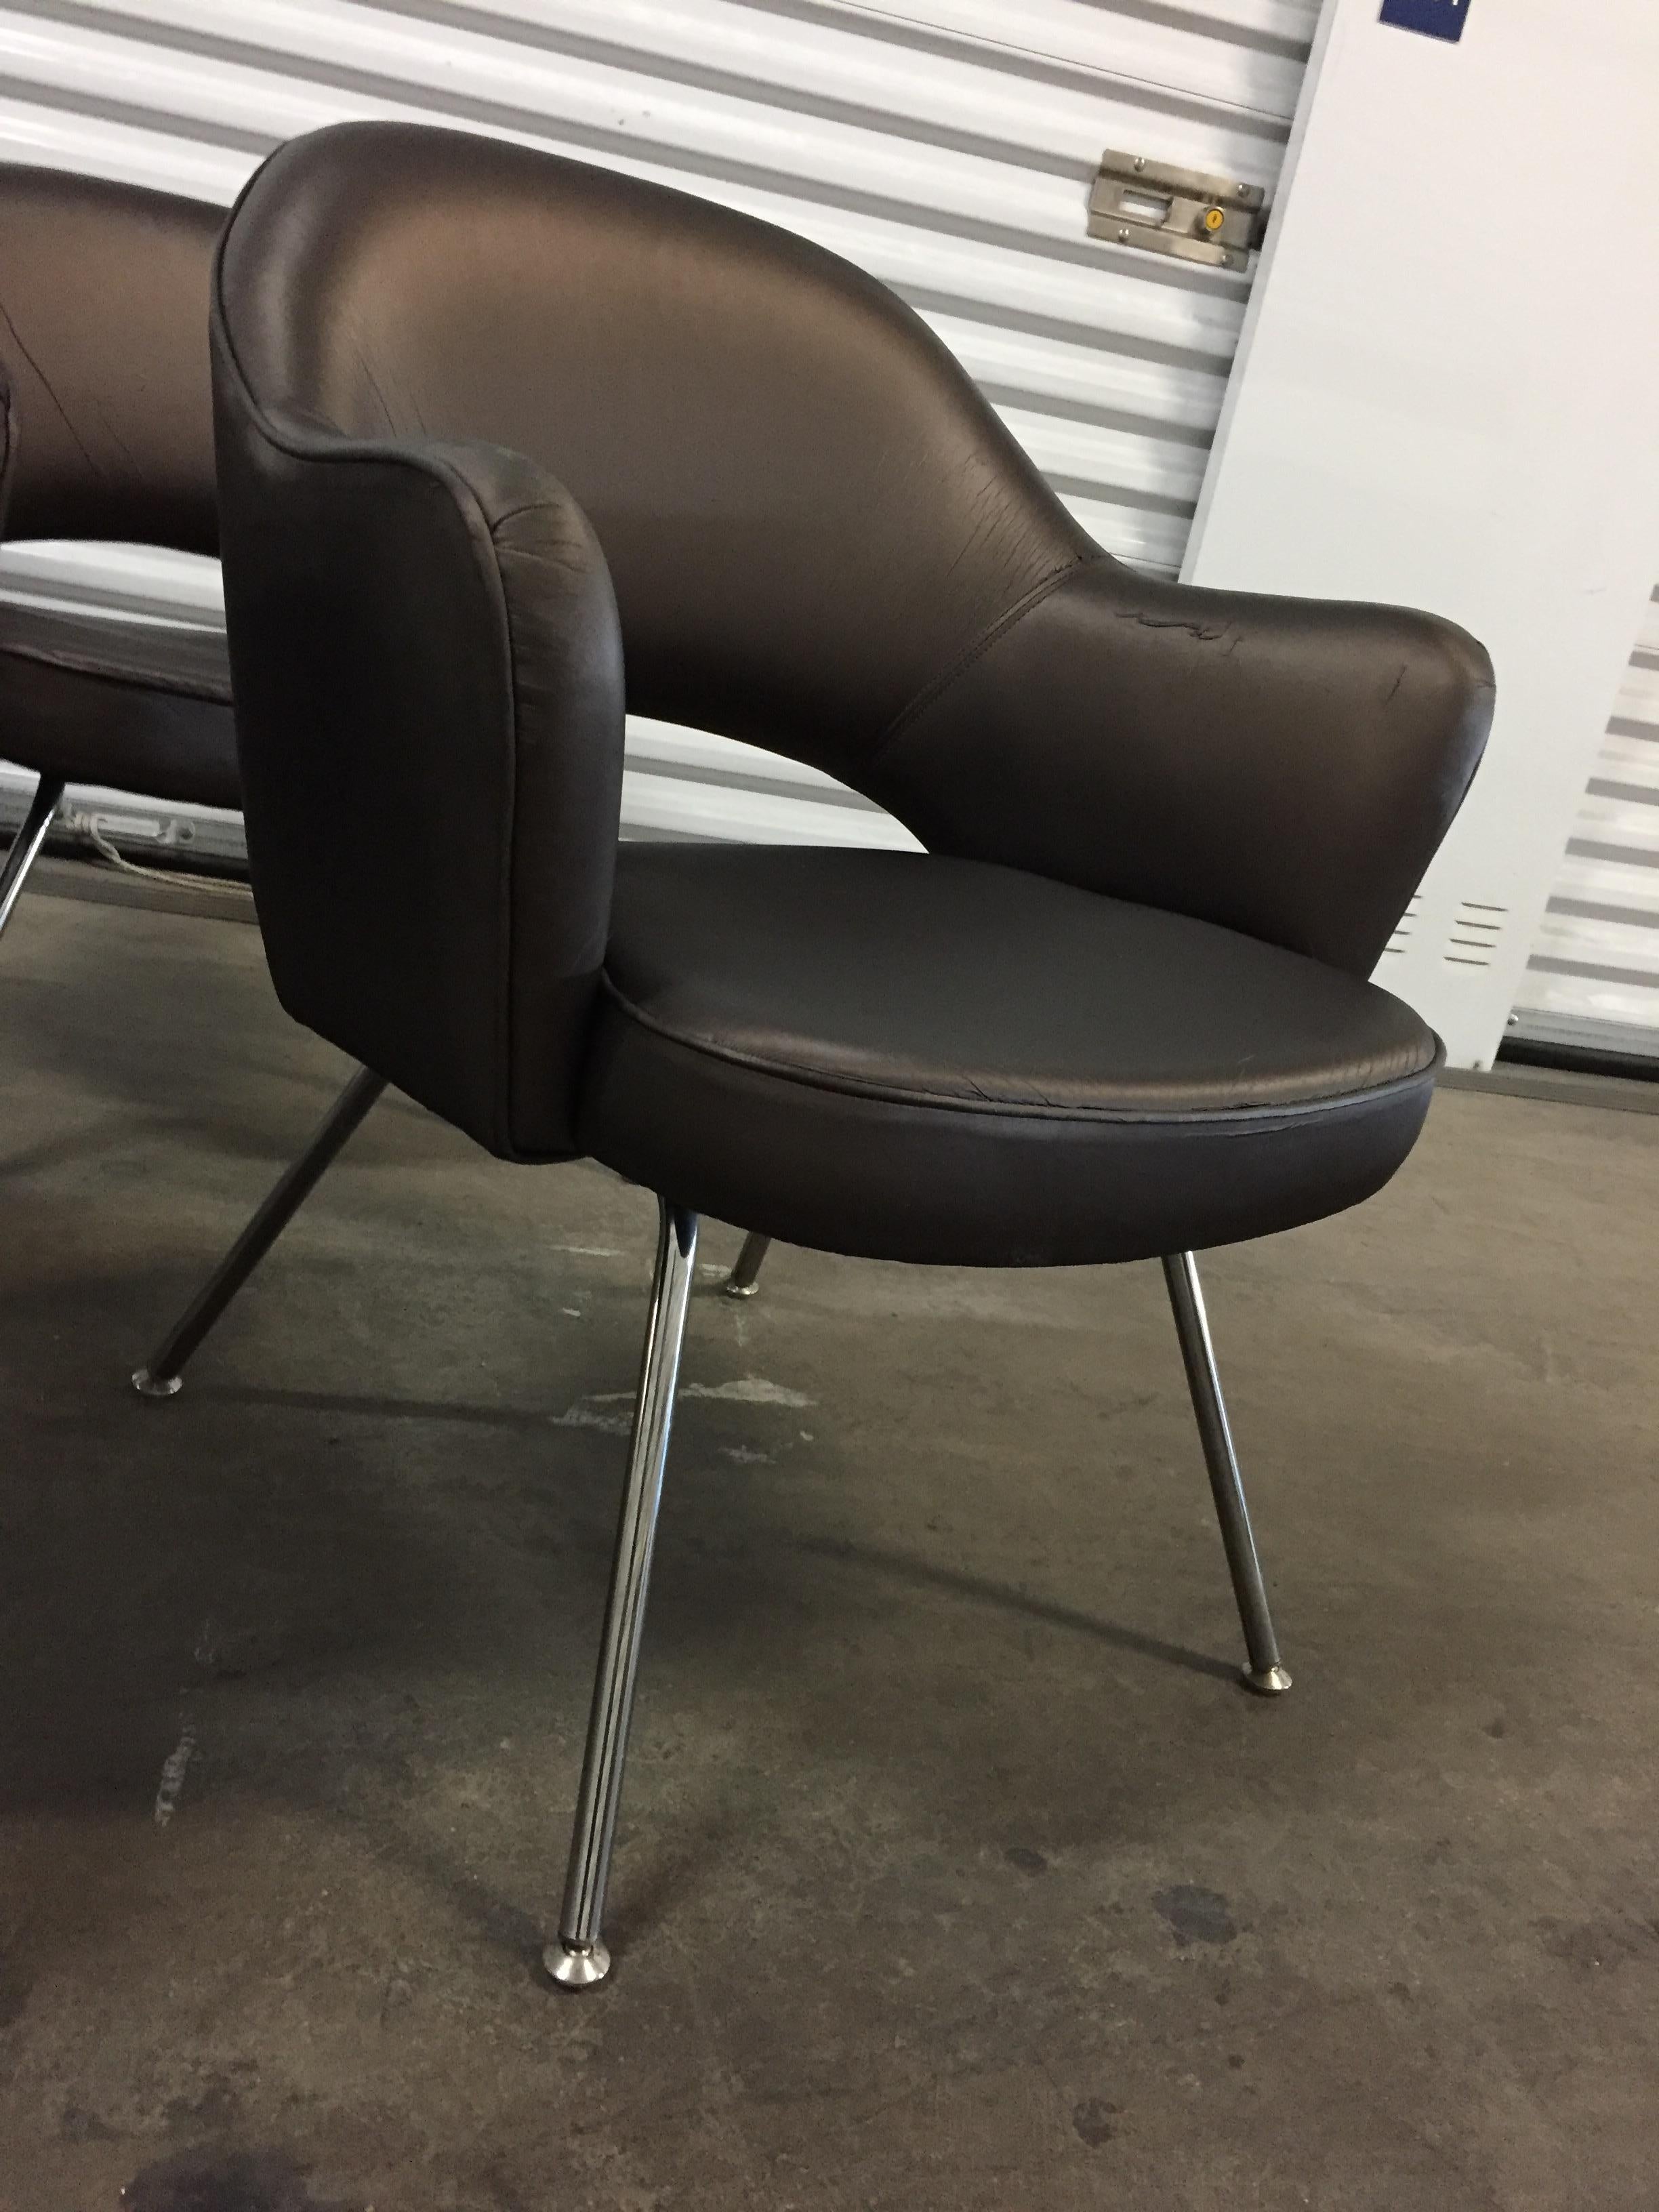 1975 Knoll Saarinen Executive Dining or Office Chairs/ Set of 6 For Sale 3